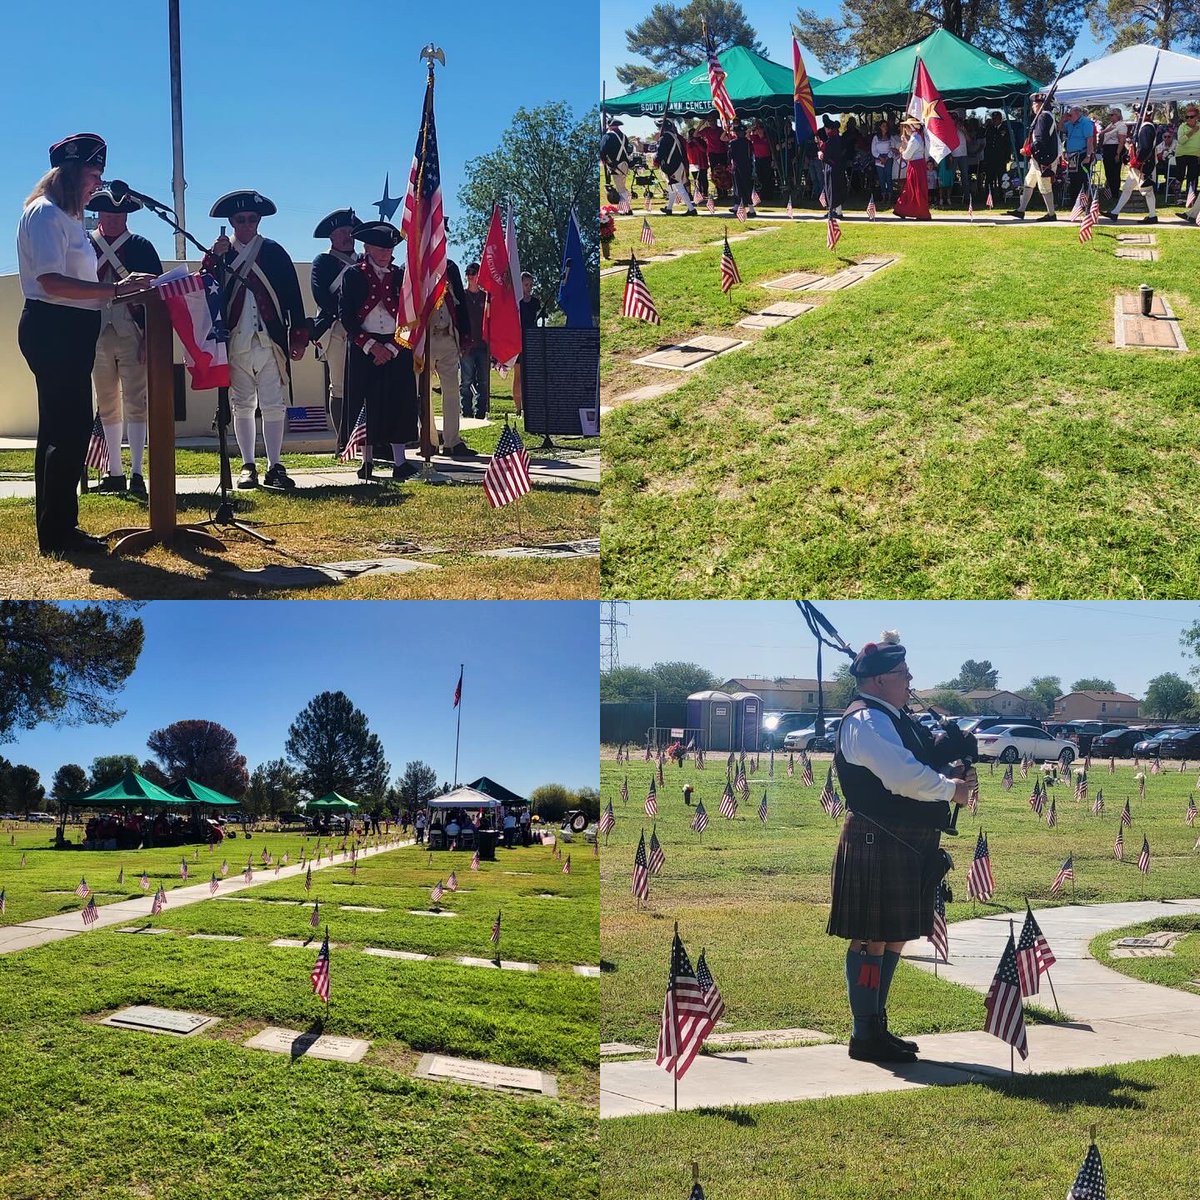 A few action shots from our Memorial Day concert at South Lawn Cemetery. 

#tucsonconcertband #music #lovemusic #localmusic #localtucson #tucsonlocal #tucsonmusic #tucson #ThisIsTucson #ThingsToDoInTucson #concert #performance #MemorialDay #BandsofACB